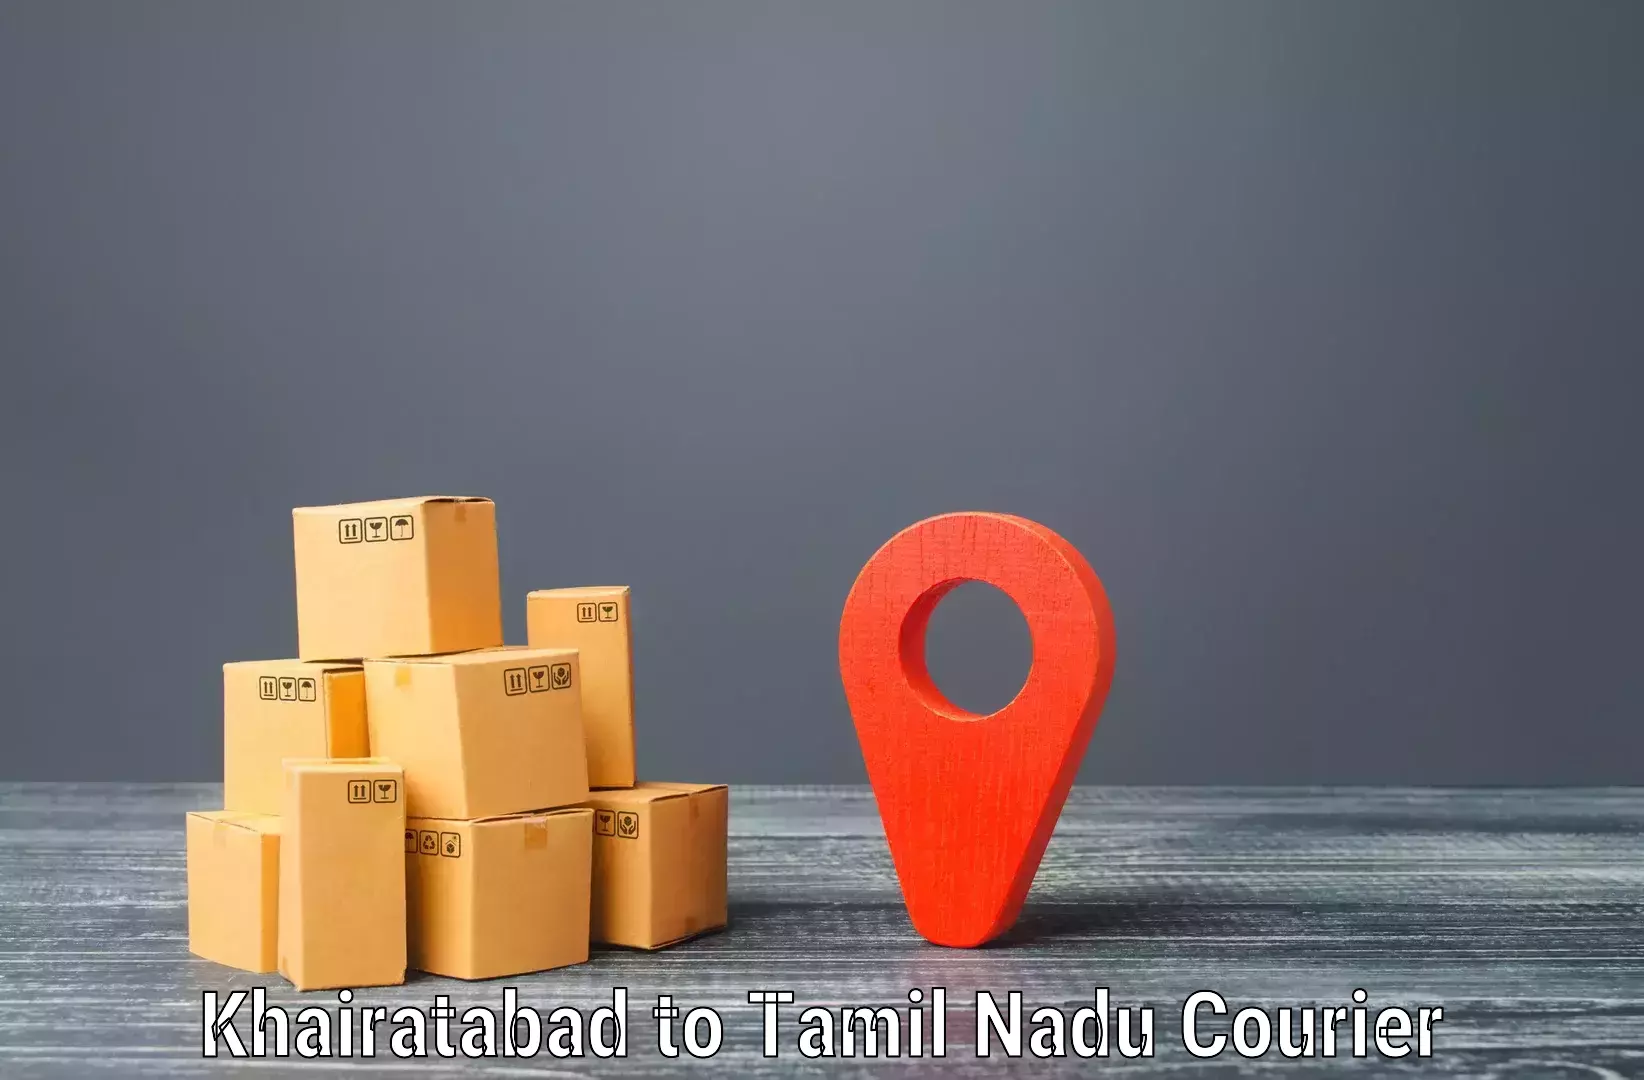 On-demand shipping options Khairatabad to Meenakshi Academy of Higher Education and Research Chennai